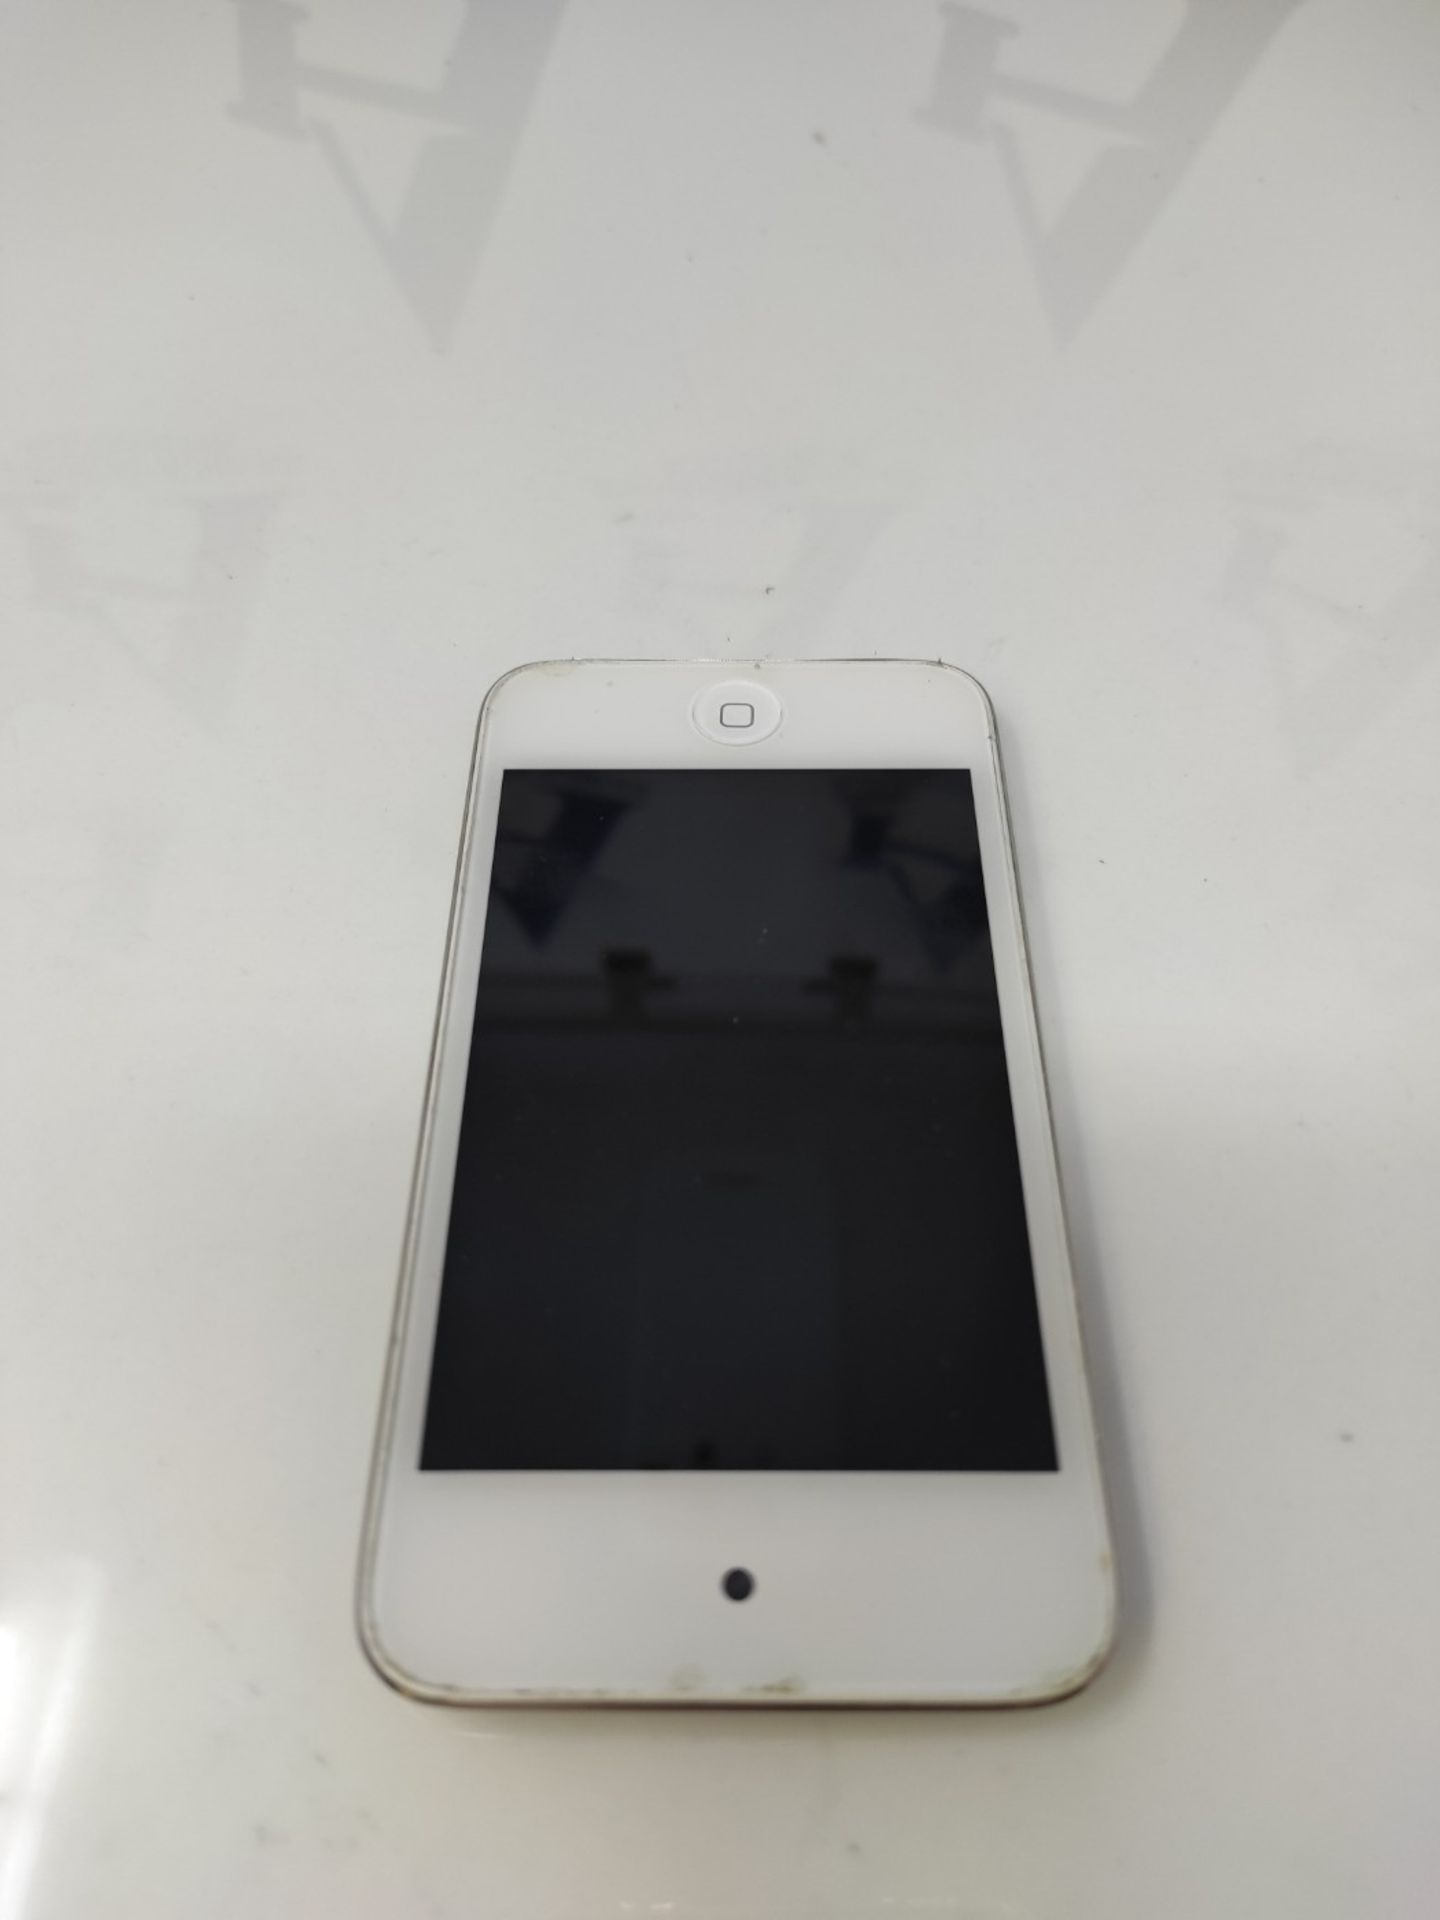 Apple iPod touch 32GB 4th gen white - Image 2 of 2